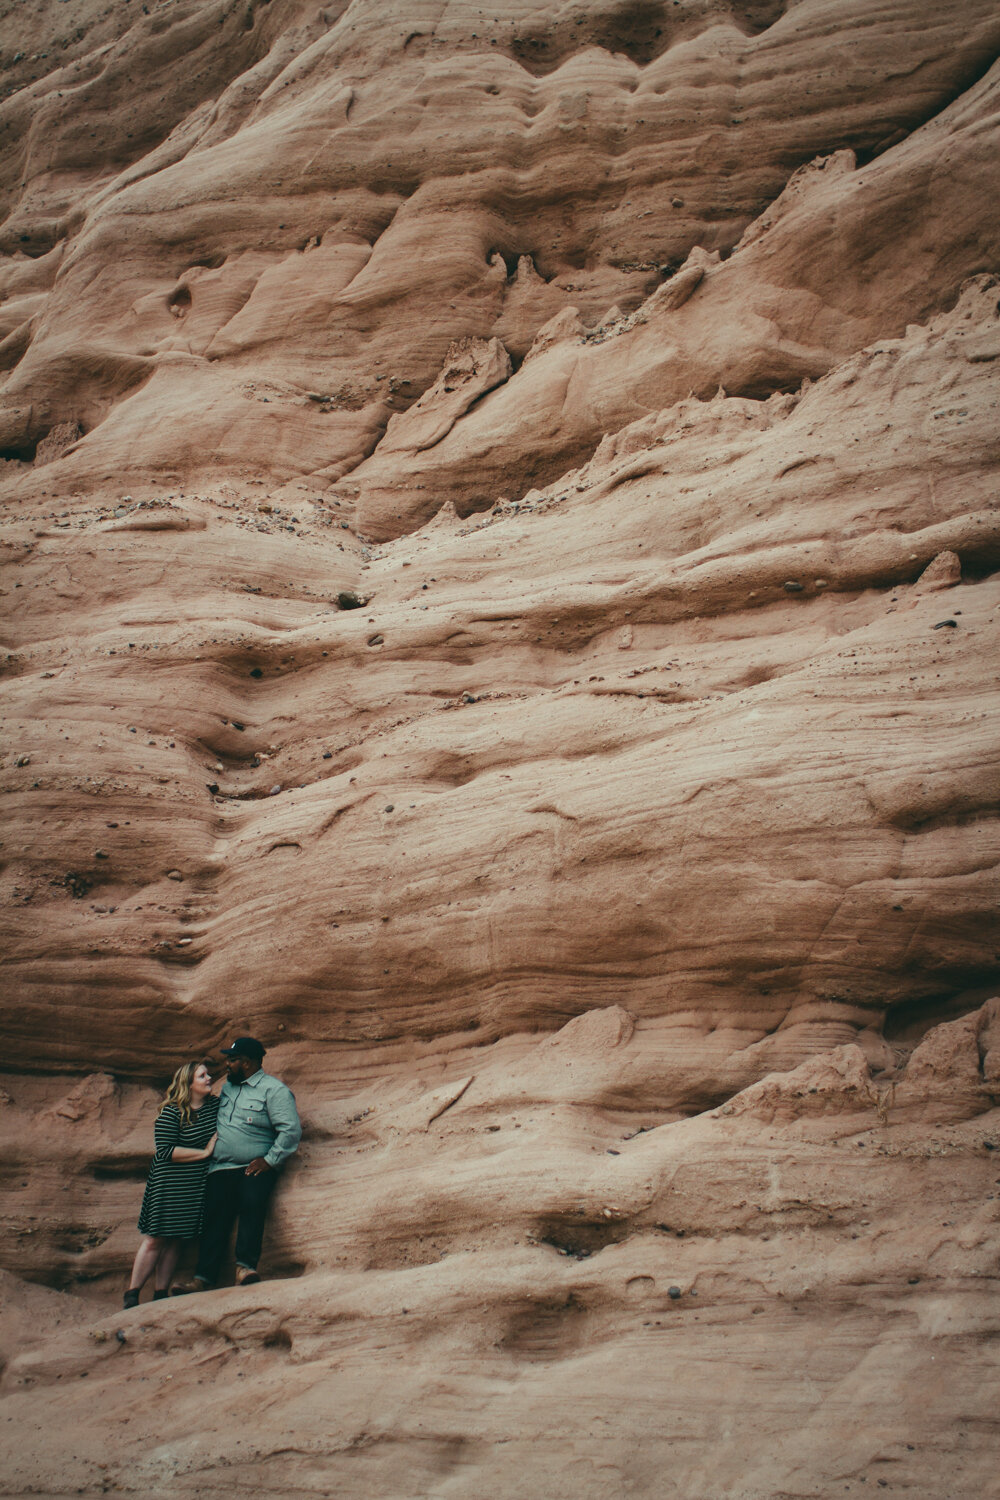 engagement engaged photography photographe marriage wedding photographer corse corsica california desert foothill ranch whiting lifestyle Anza Creative-19.jpg